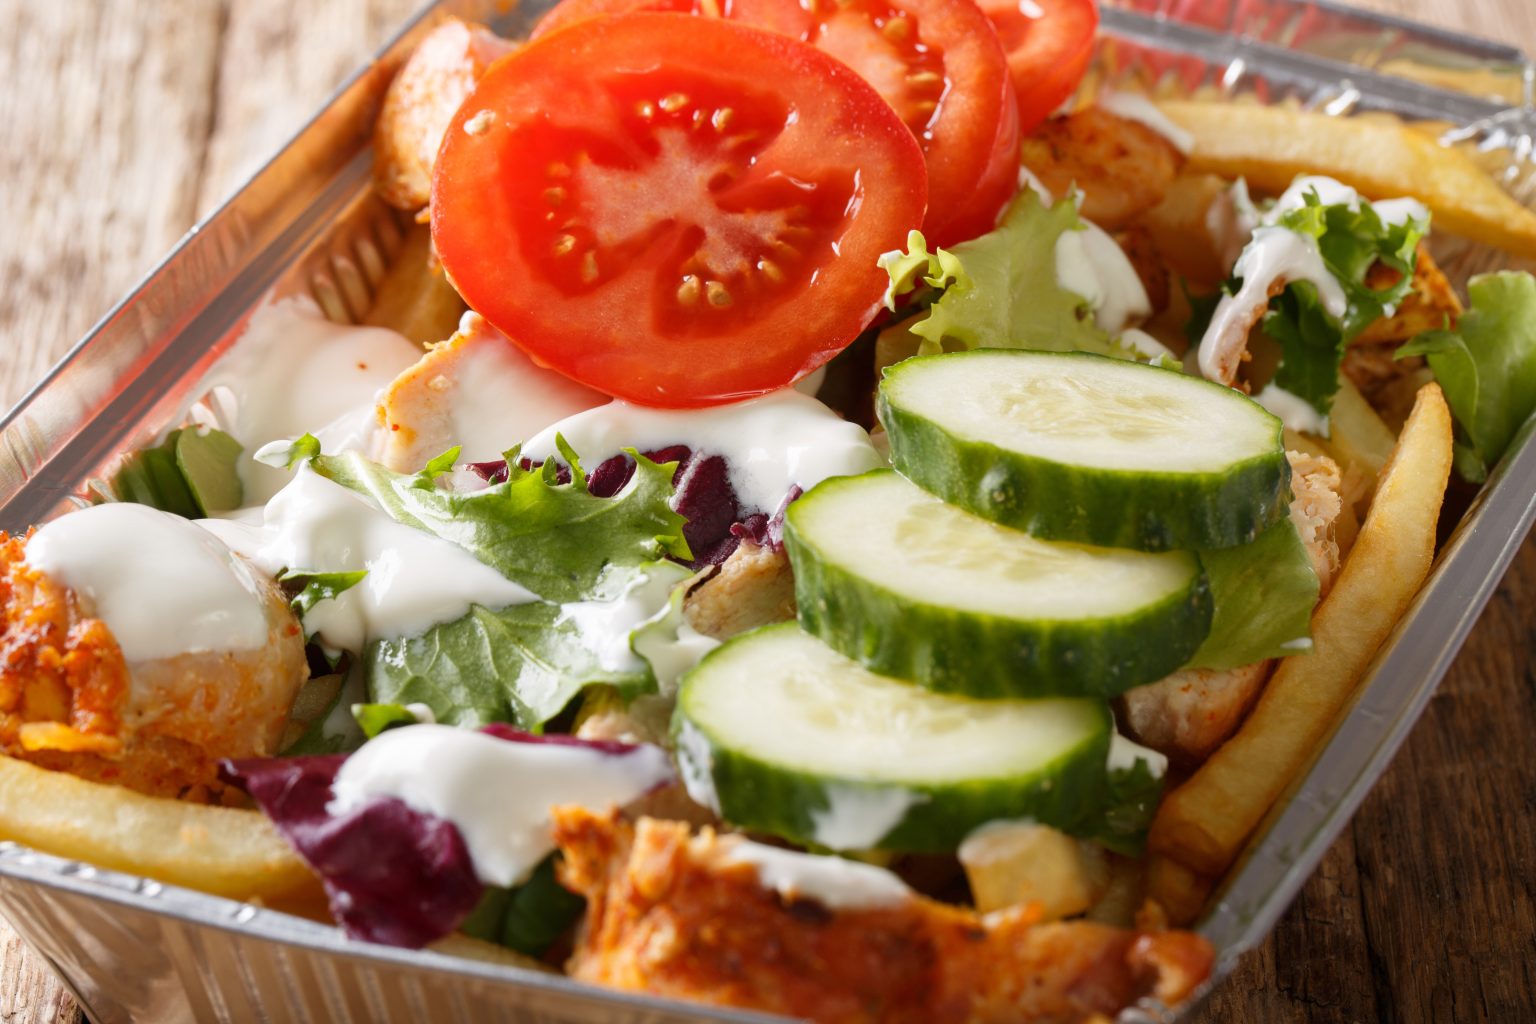 Traditional Dutch fast food kapsalon of french fries, chicken, f